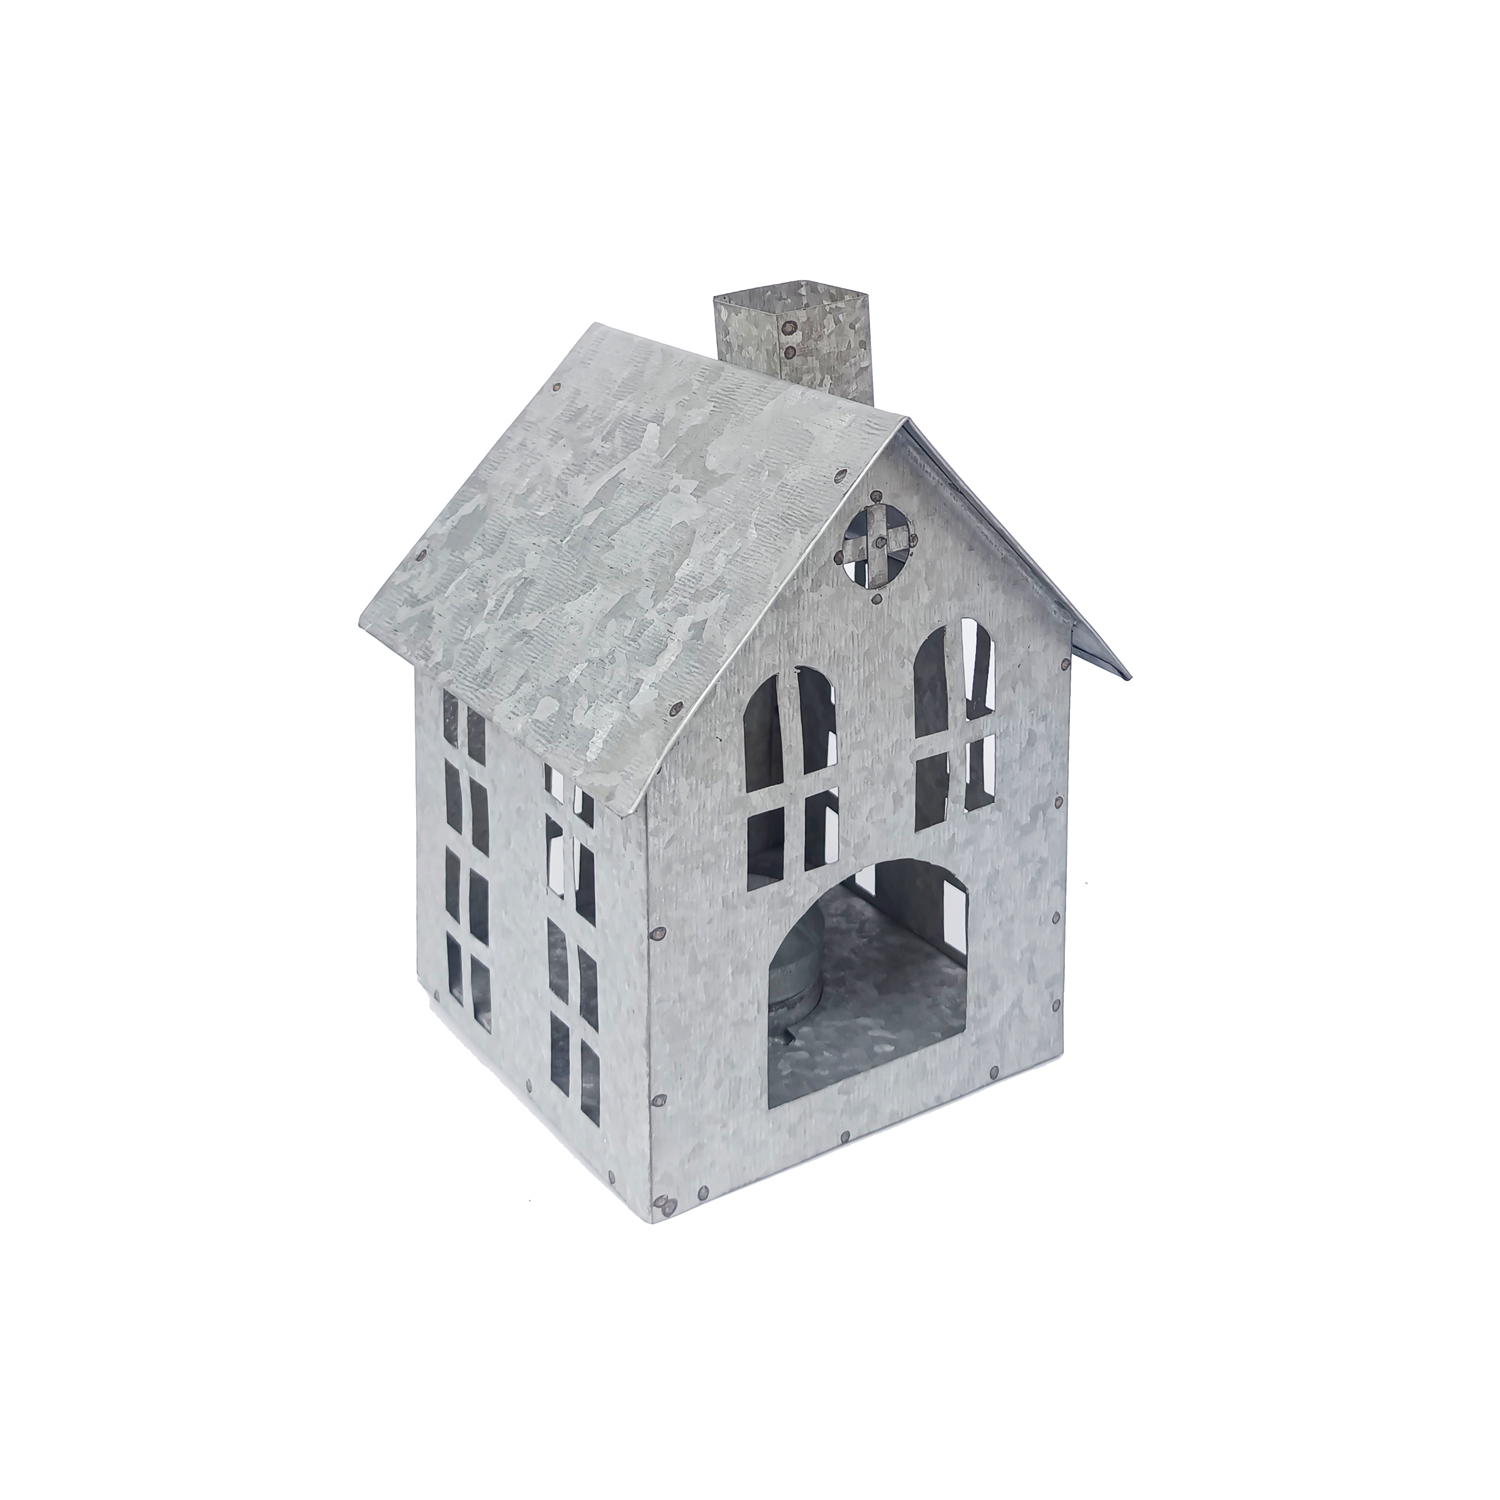 Galvanised Tealight House Small 12x12x15cm Gift